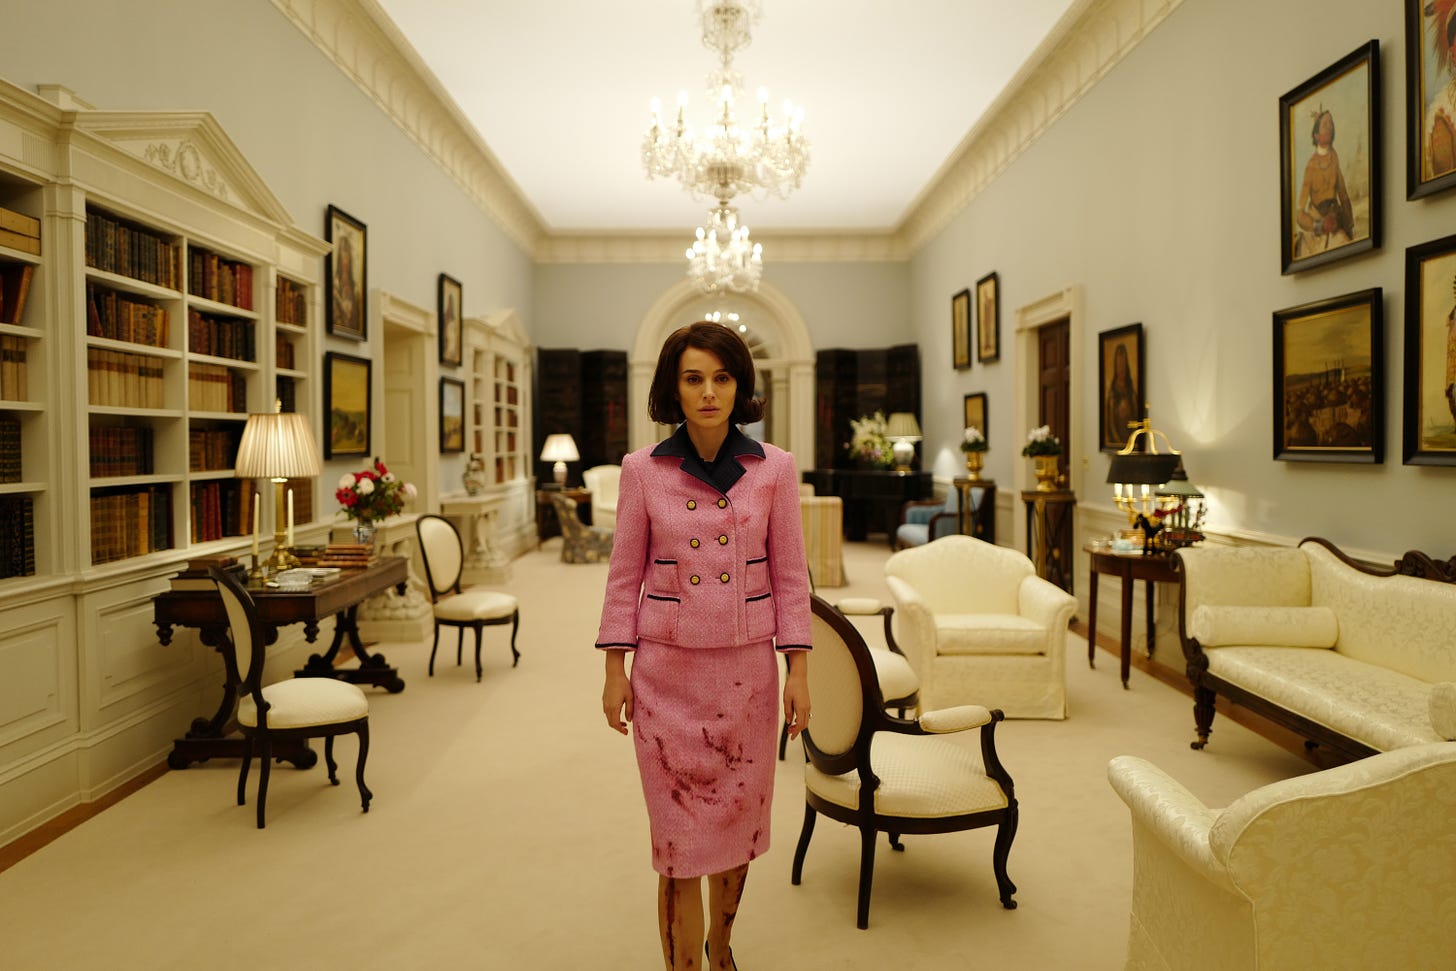 A woman walks down a hallway wearing a pink suit. The suit is covered in blood. There are bookcases and paintings on the walls.